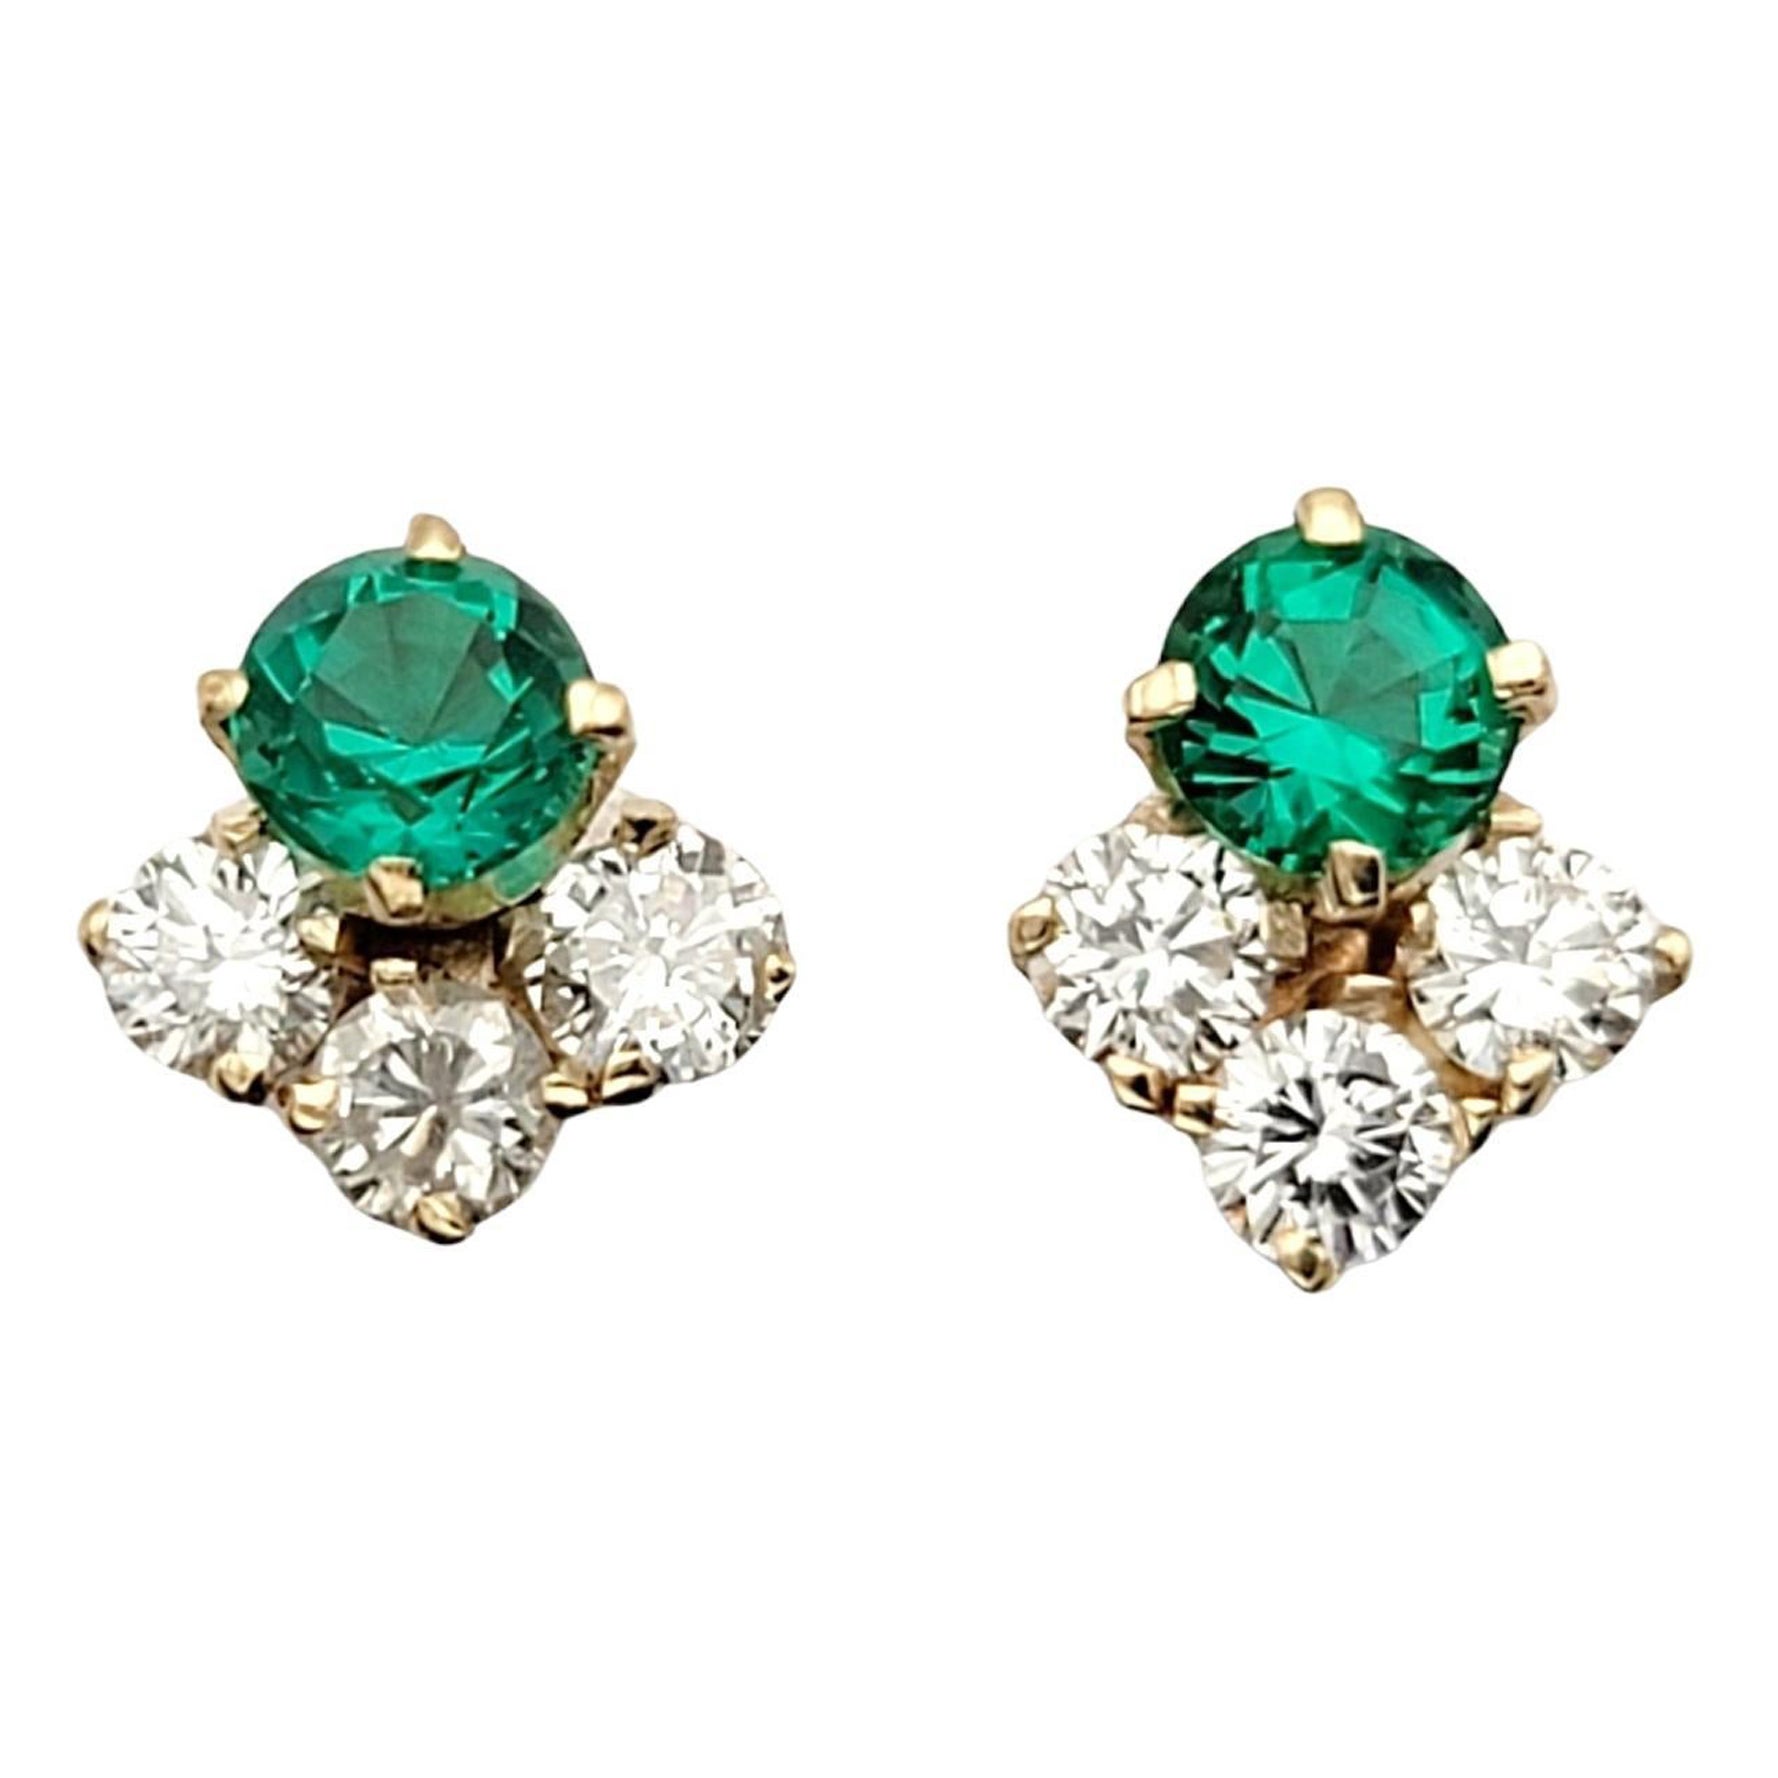 1.27 Carats Total Round Diamond and Lab-Created Emerald Stud Earrings